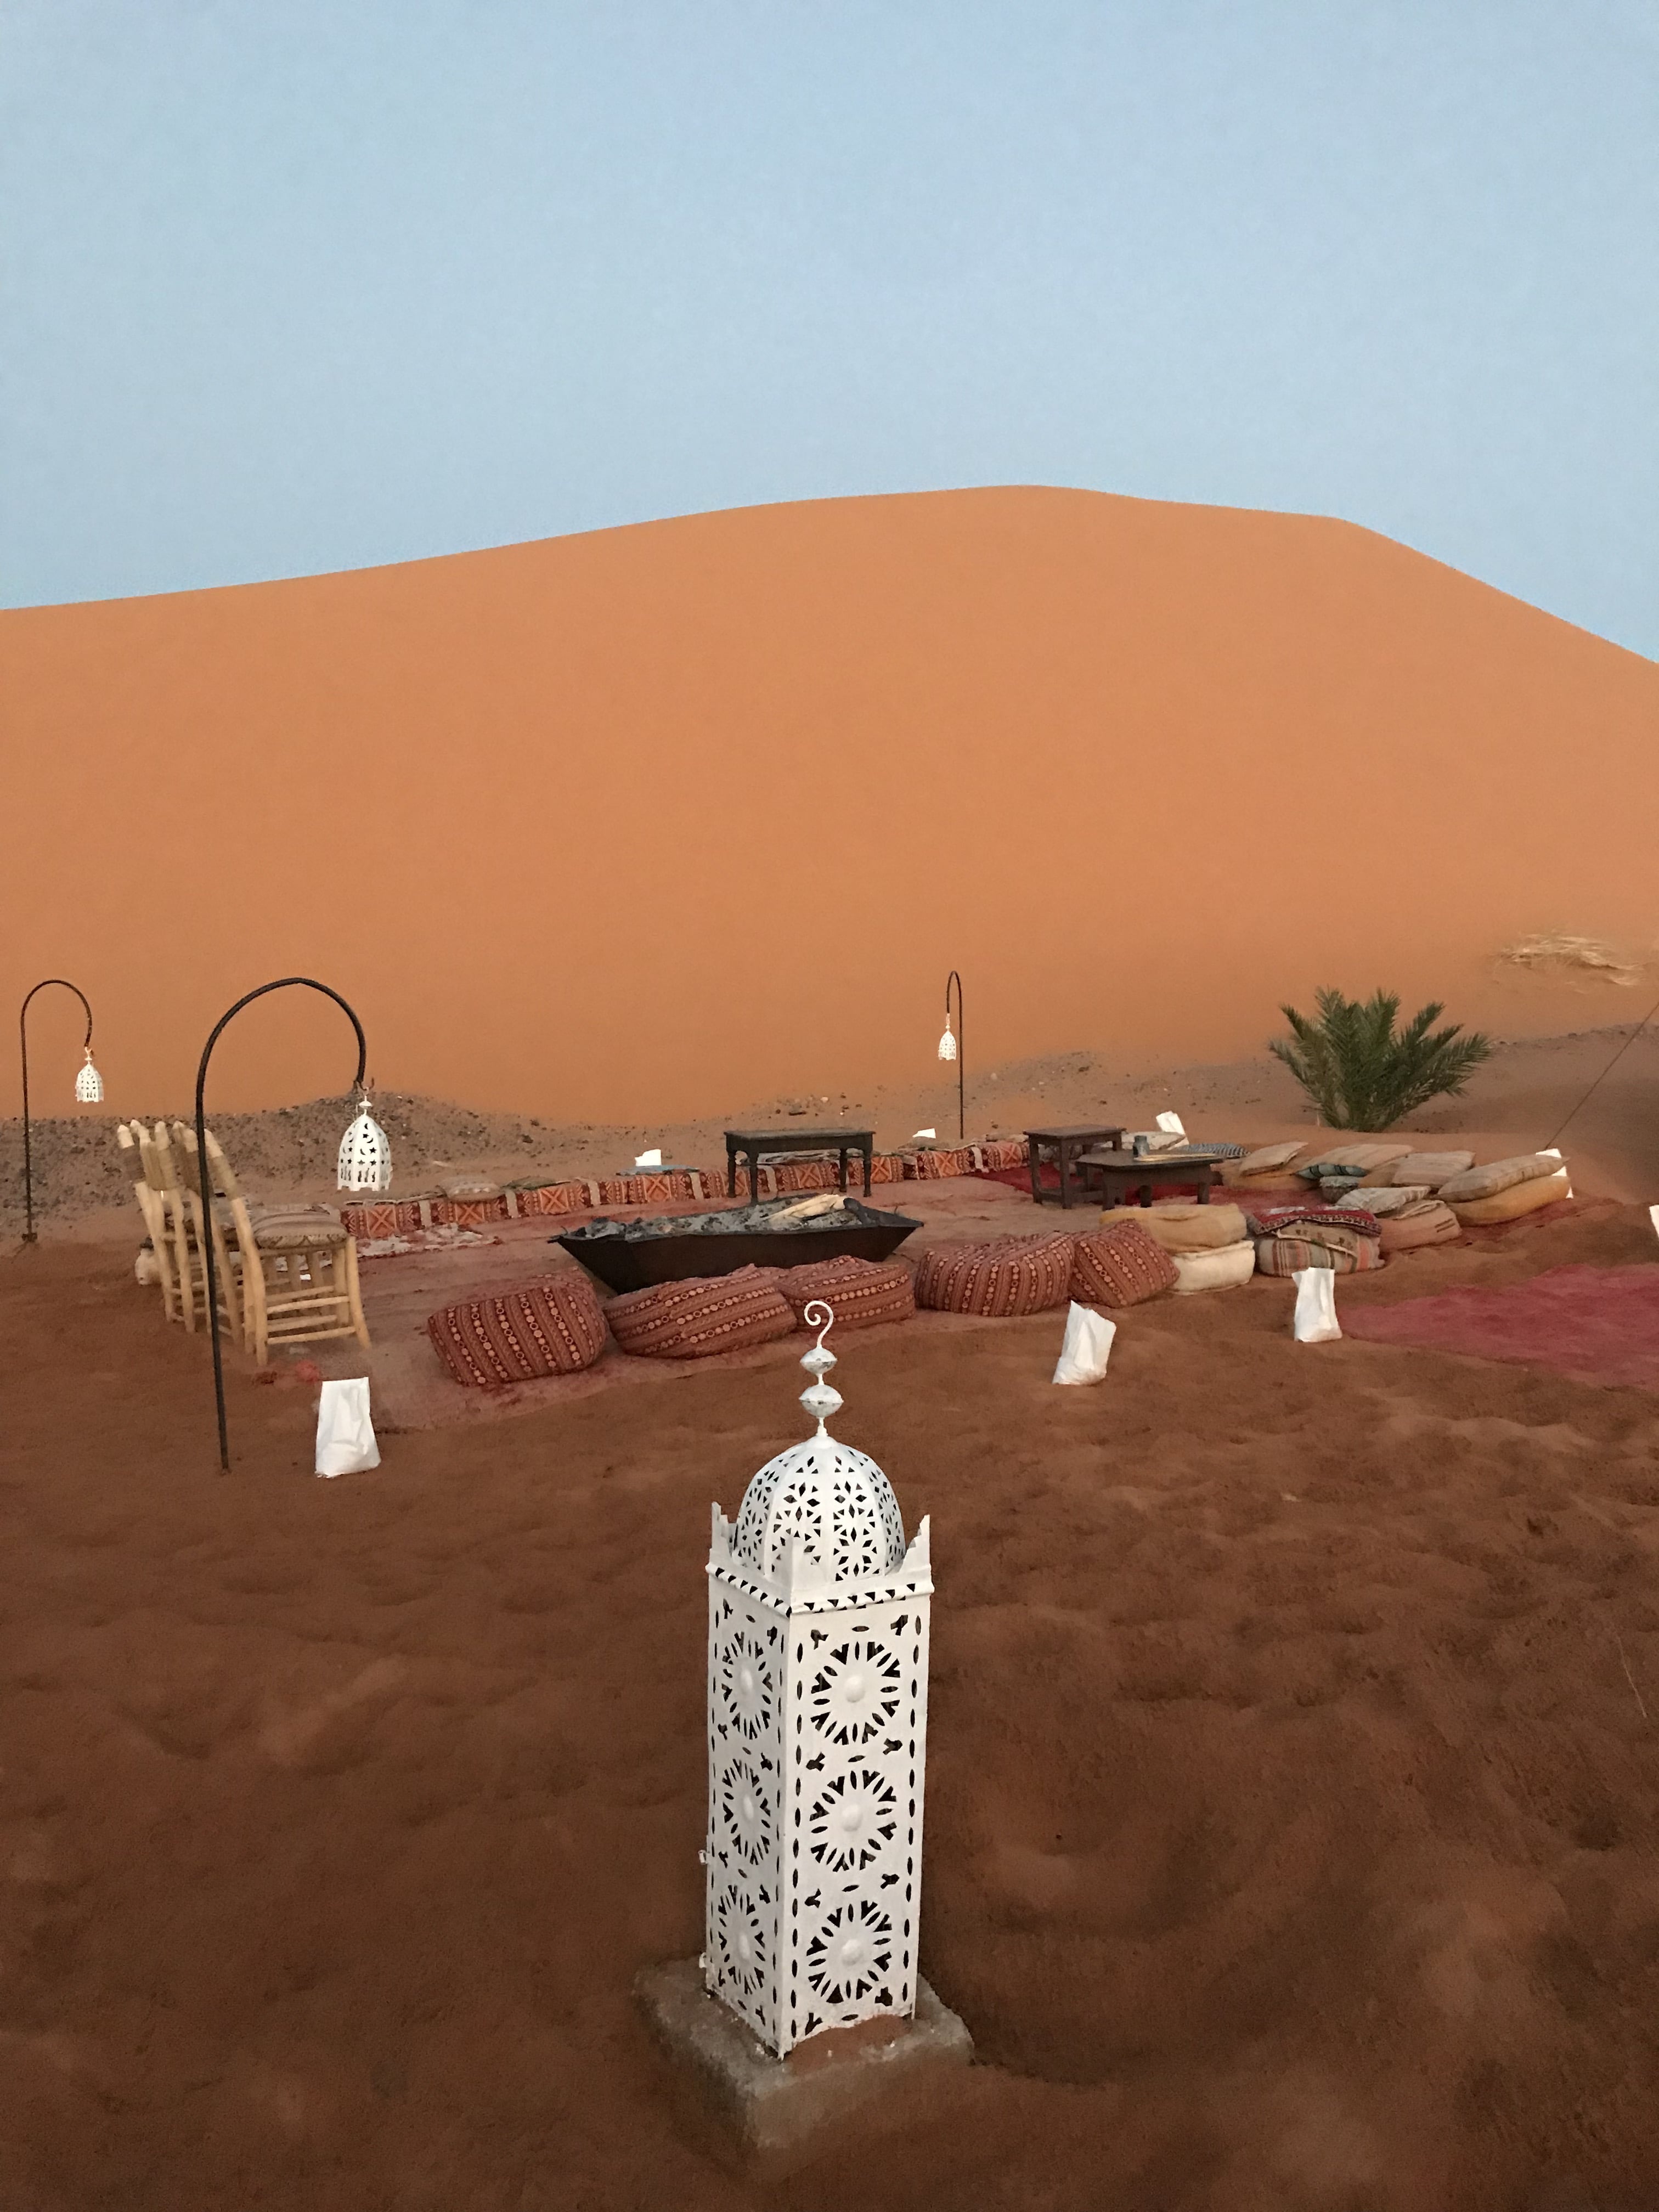 OUR LUXURY DESERT CAMP EXCURSION IN MOROCCO | Morocco Desert Camp - Desert Luxury Camp Morocco - Luxury Desert Camp Morocco - Morocco Sahara Desert Camp - Desert Camp Merzouga Morocco - Erg Chebbi Camp Morocco - Camping Morocco - Best Luxury Desert Camp Morocco - Sahara Desert Camp - Dar Jnan Tiouira - Erg Chebbi Sand Dunes - Morocco Travel Blog - #morocco #saharadesert #travelblog